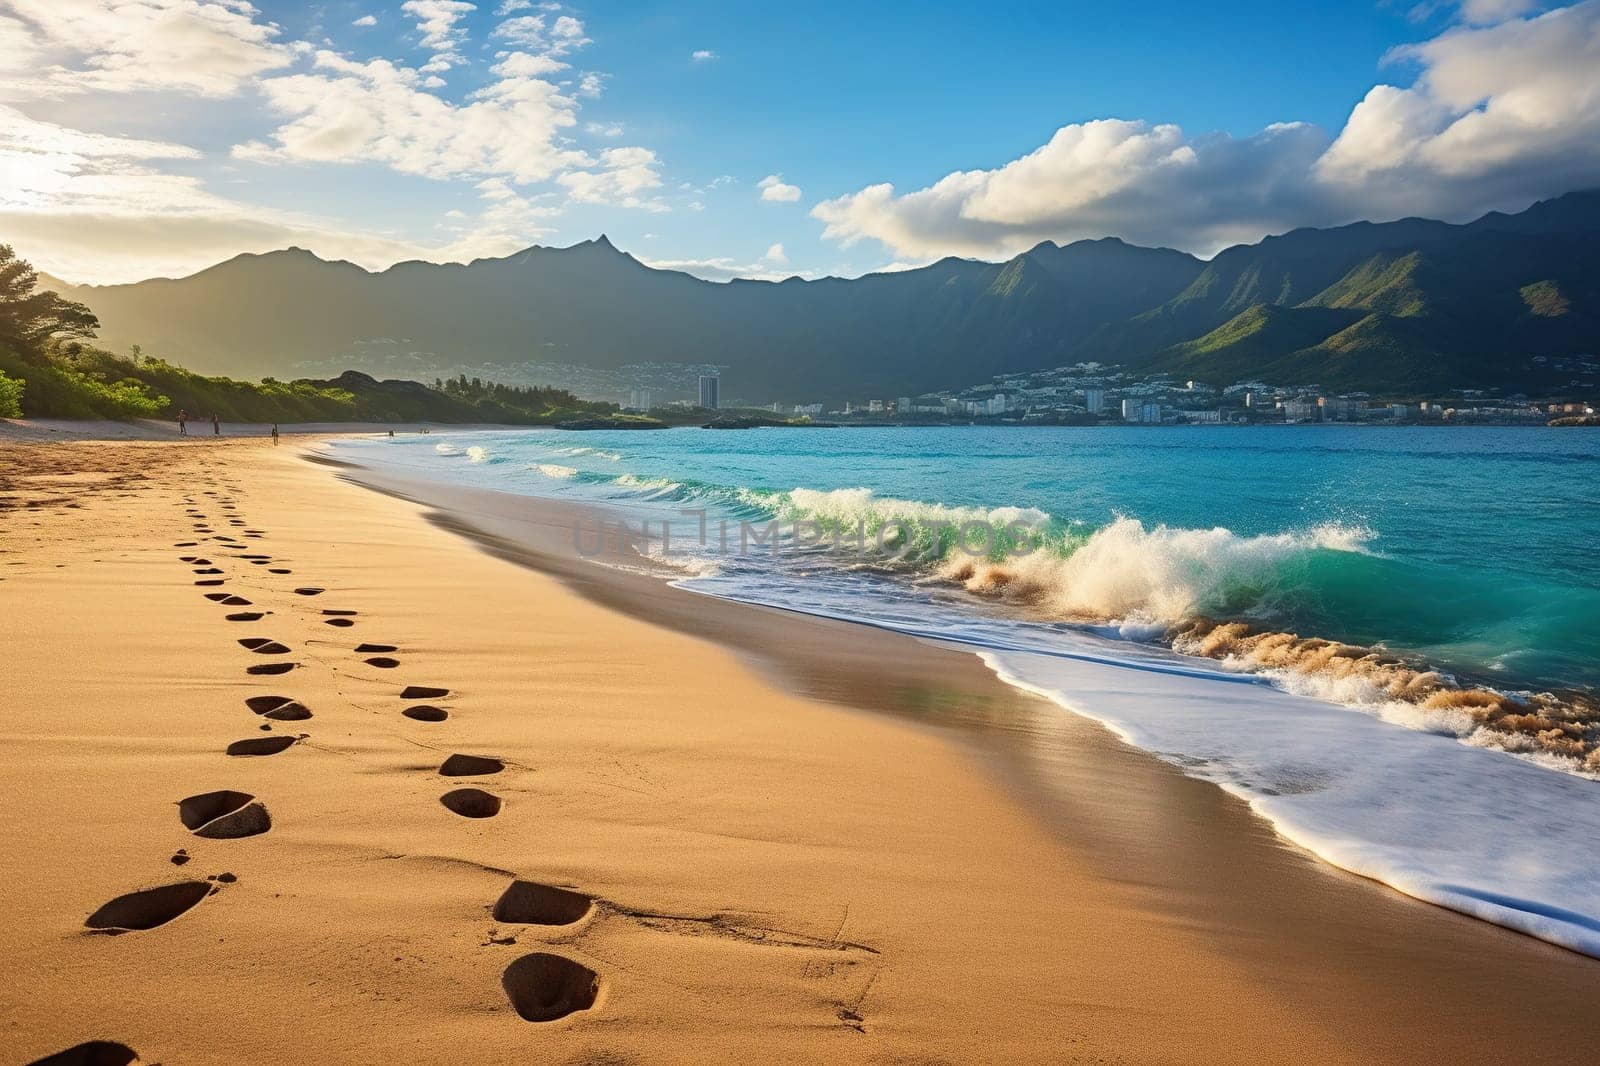 Footprints in the sand along the seashore near the mountains. Vacation concept. Generated by artificial intelligence by Vovmar